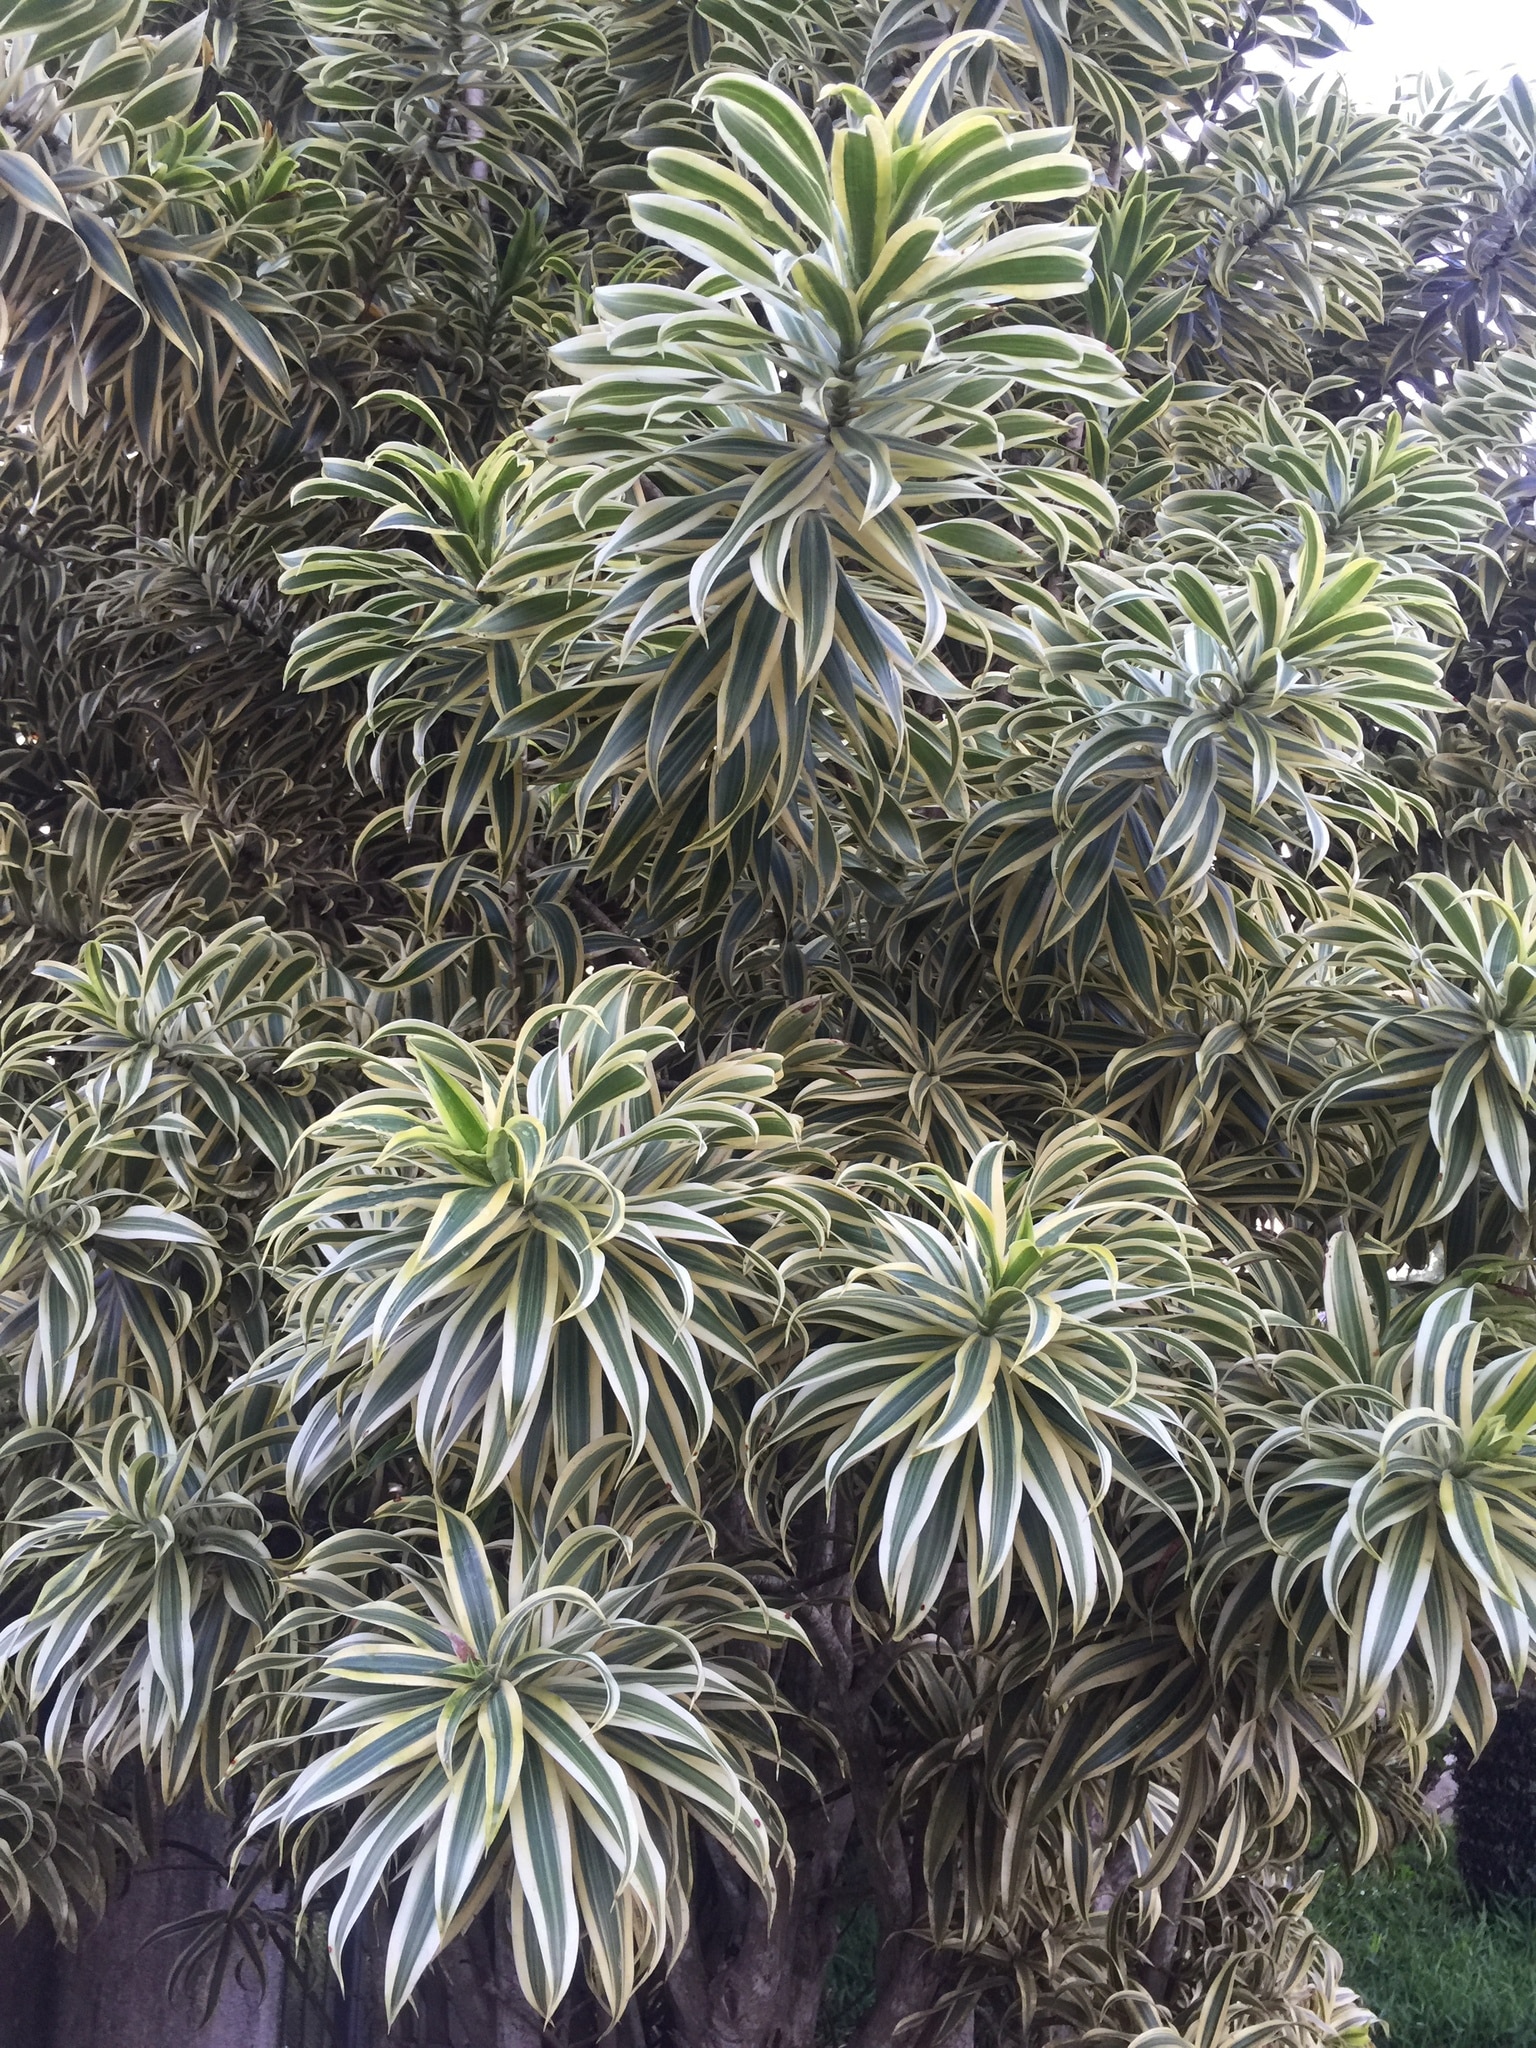 Top 5 FAQ And Answers For Dracaena